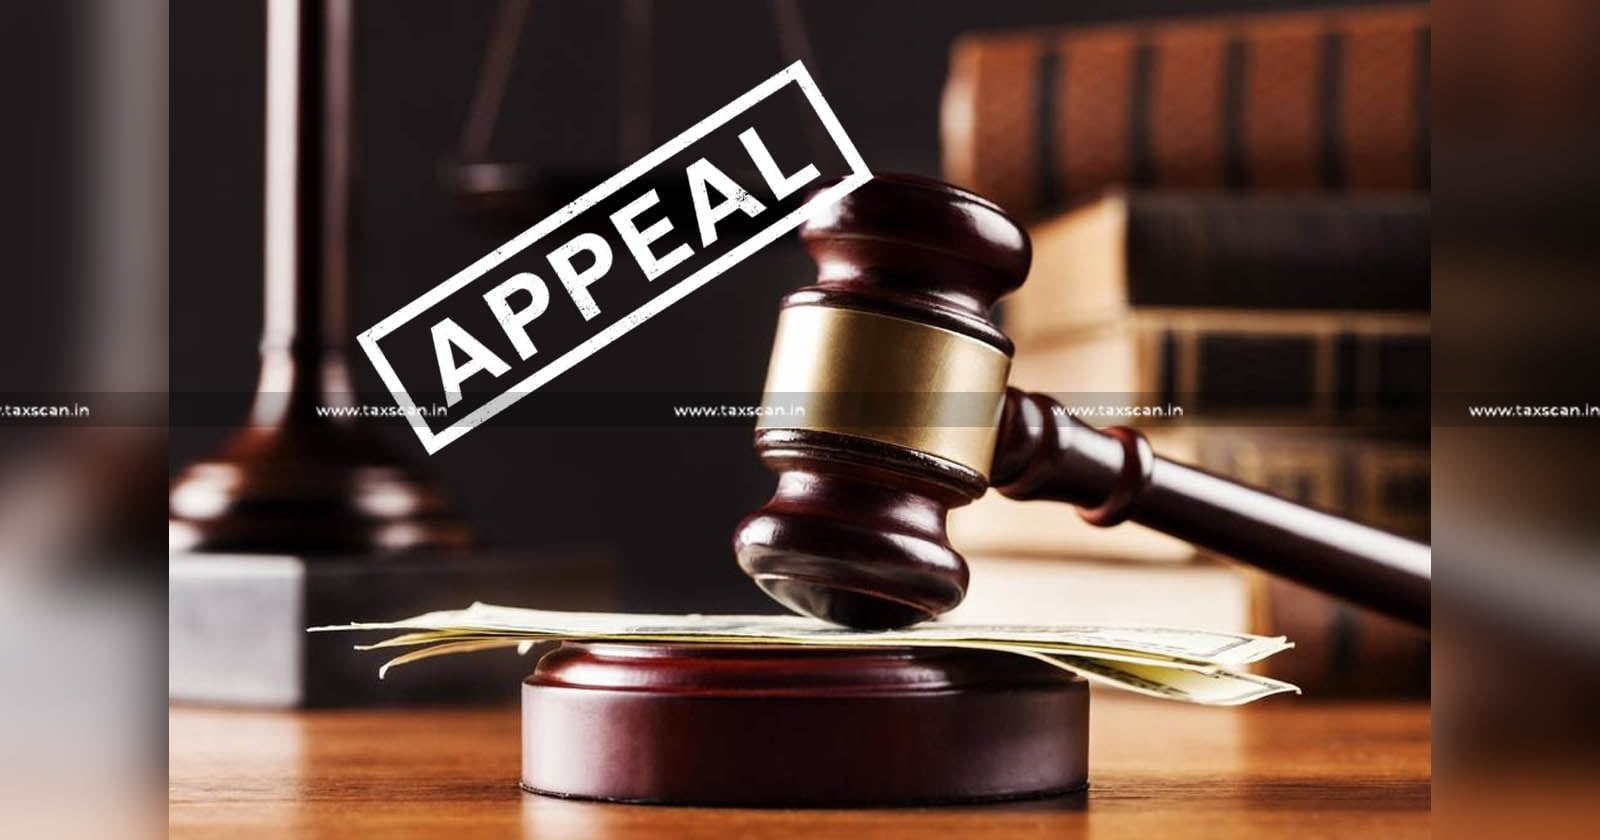 Abeyance Appeal Proceedings - Apollo Pharmacies - ITAT grants relief - Pharmacies - ITAT - relief - Proceedings - pending Petition - Petition - Assessee - Taxscan